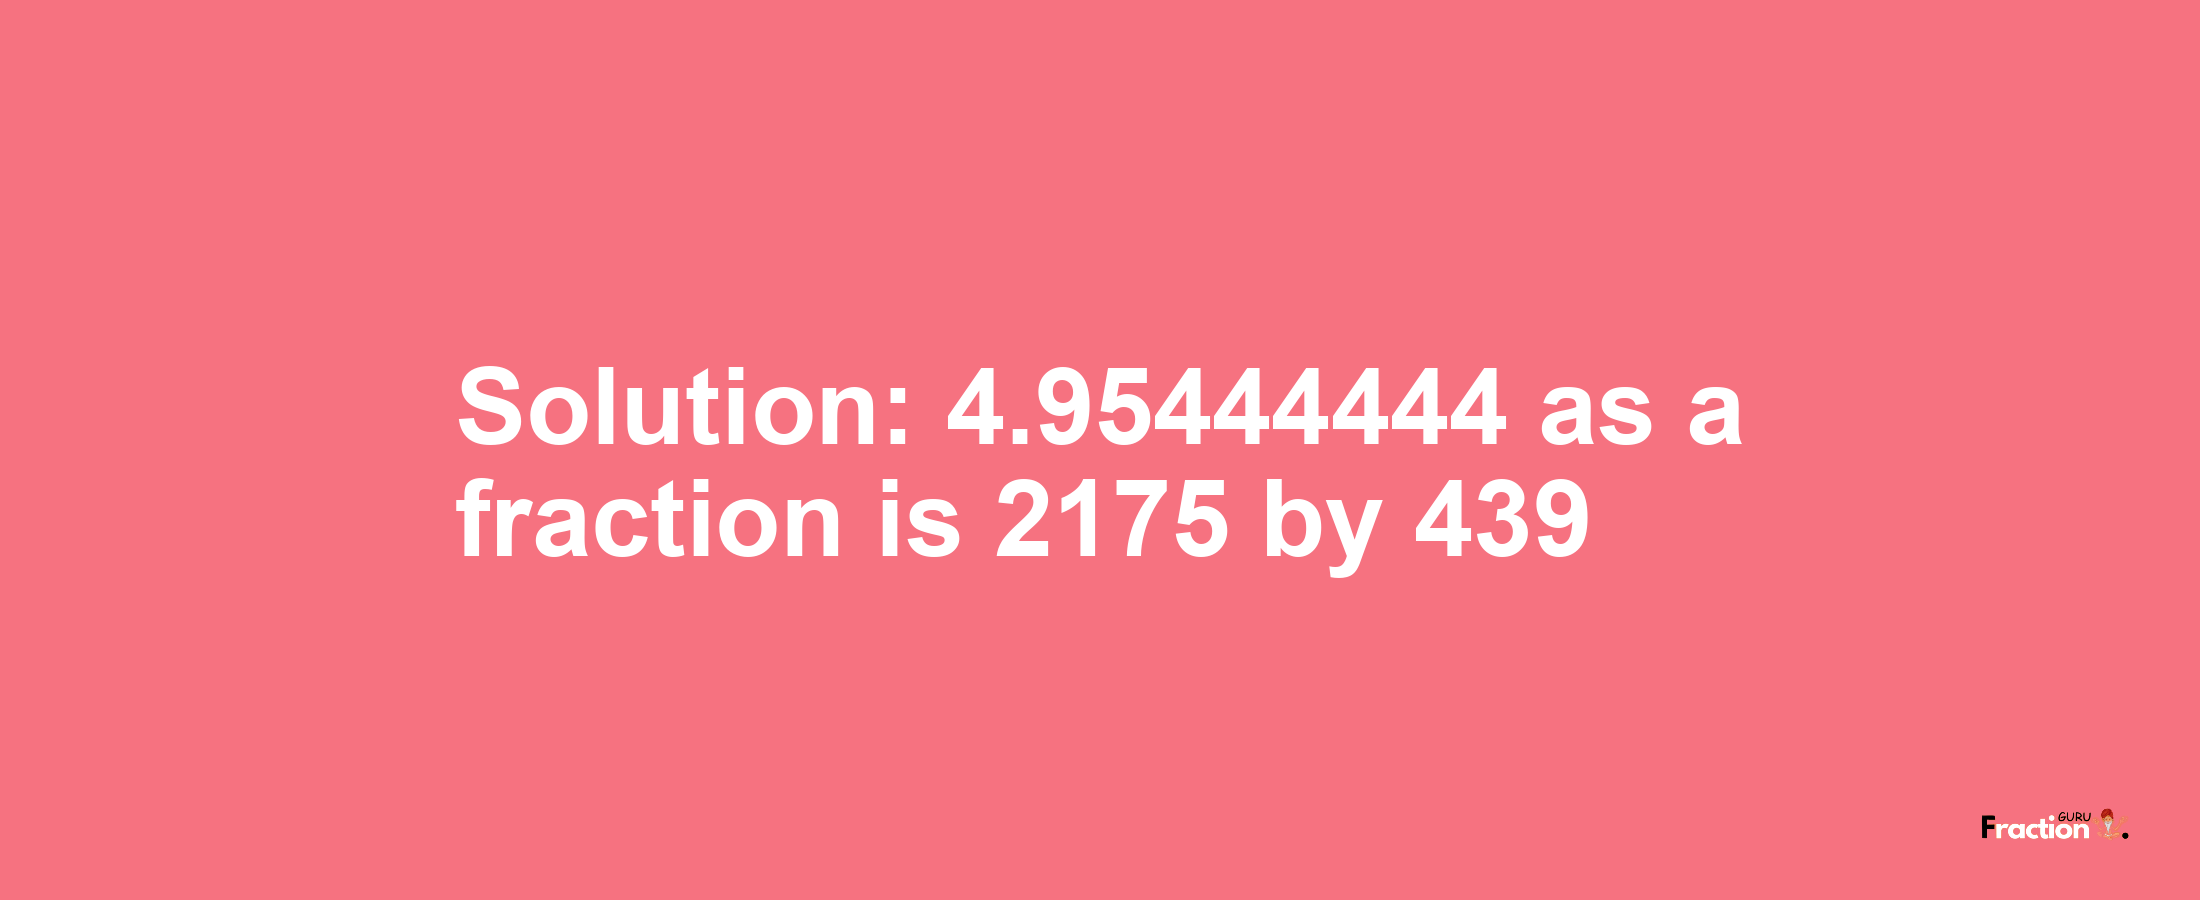 Solution:4.95444444 as a fraction is 2175/439